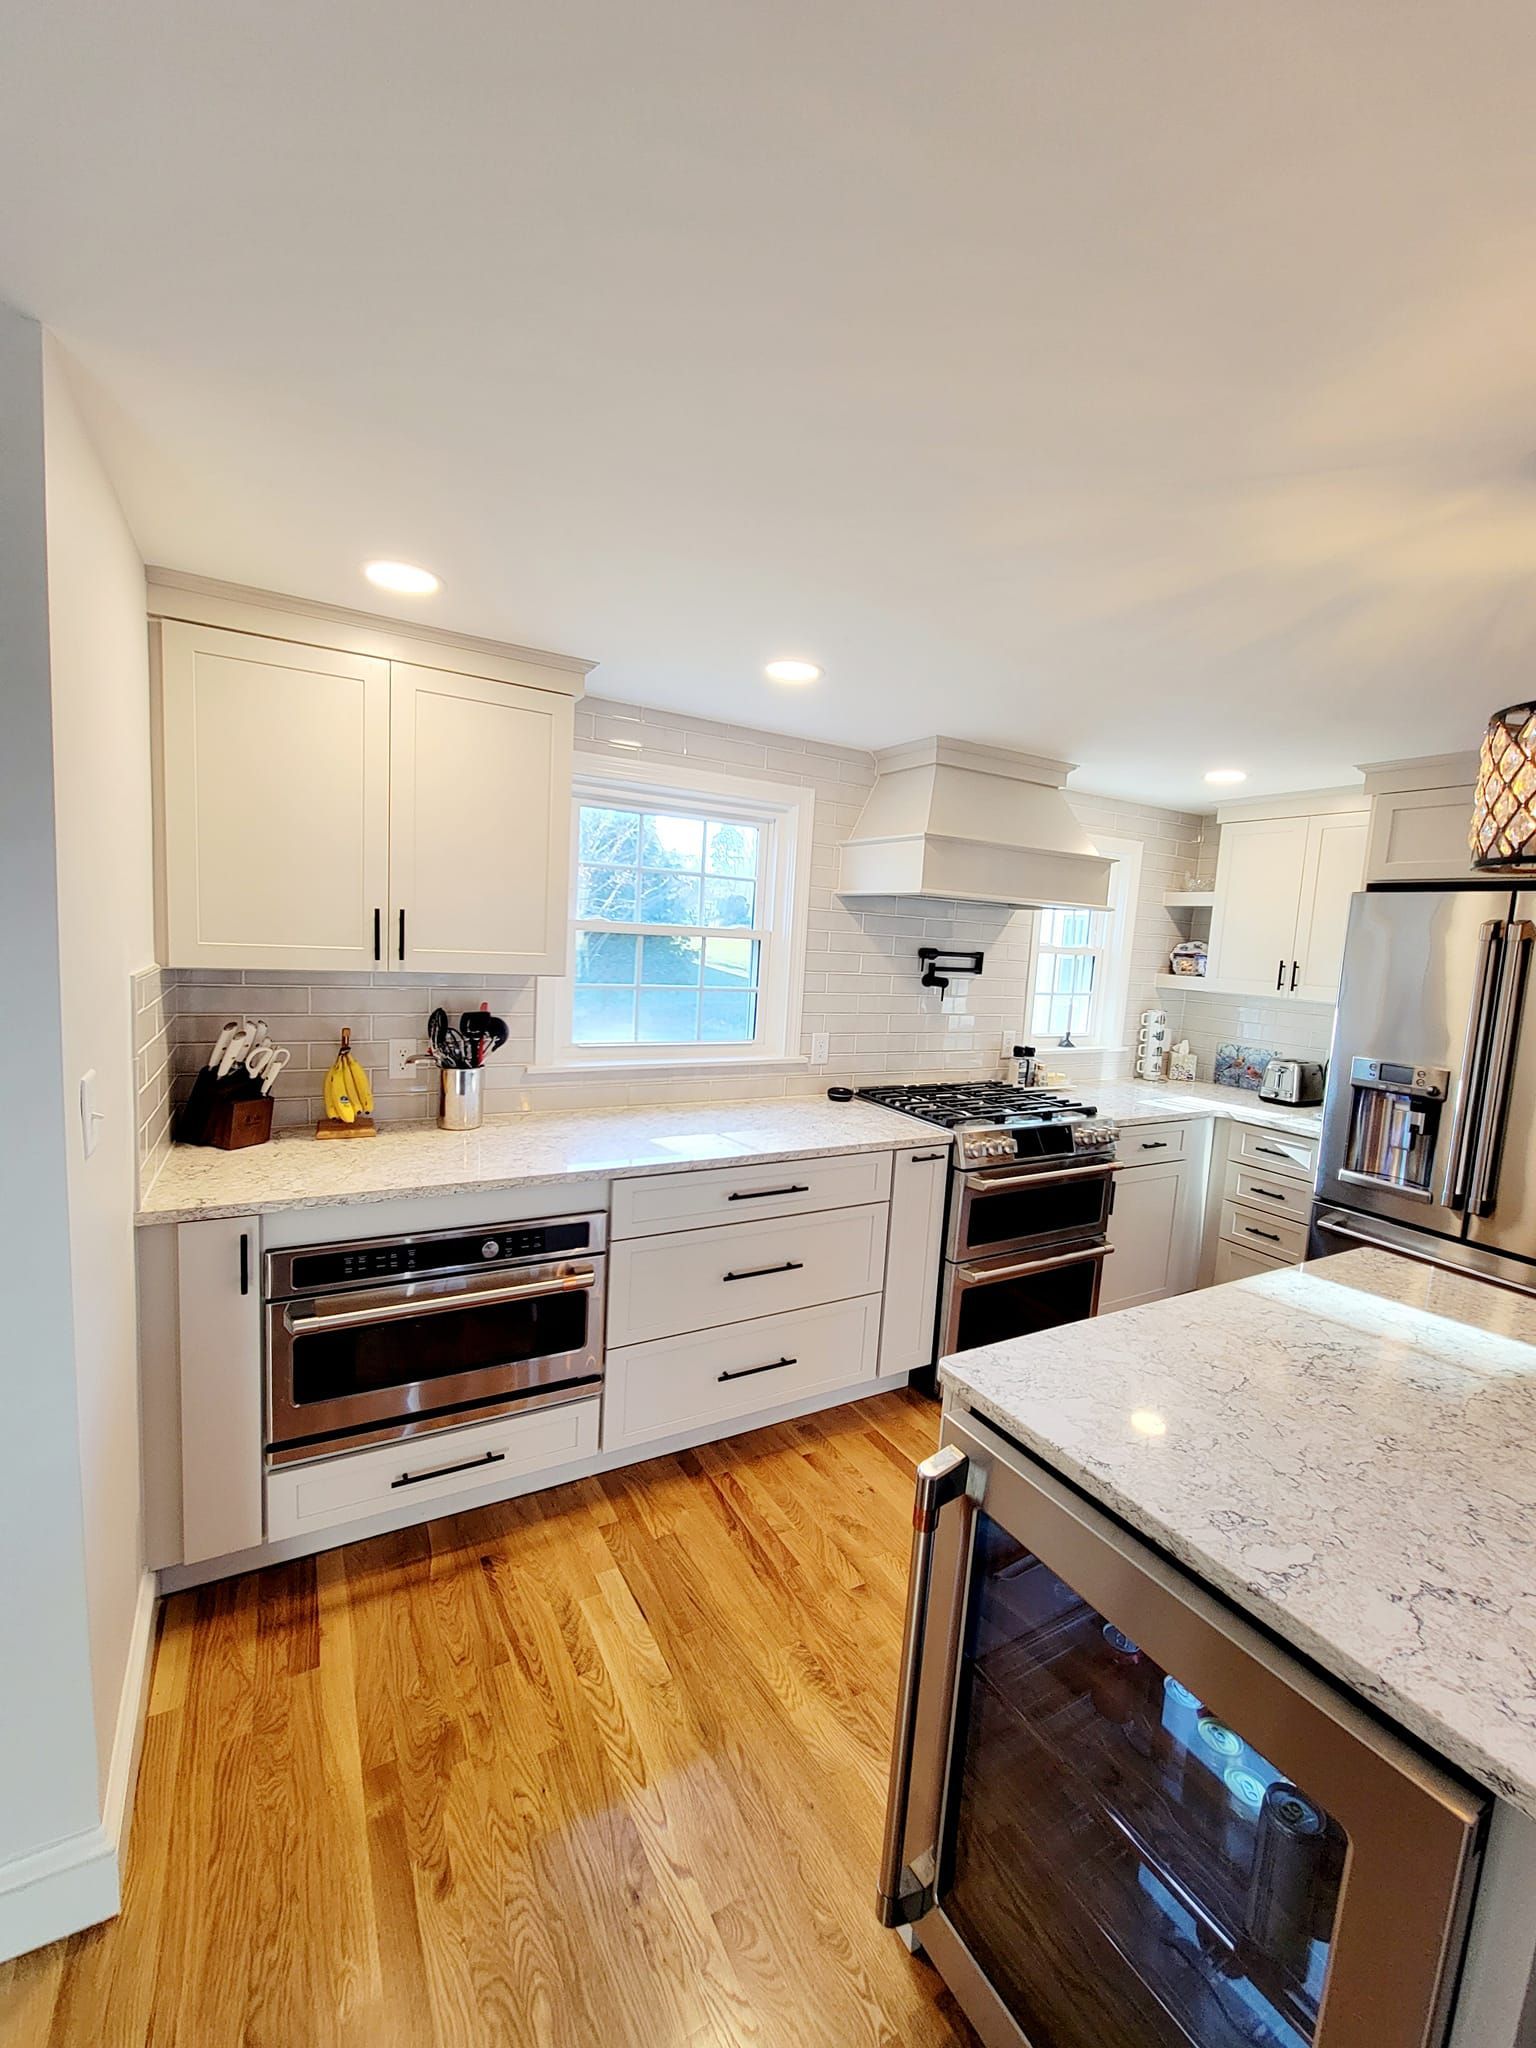 Home Improvement Contractor in Melrose, MA for Kitchen Remodeling